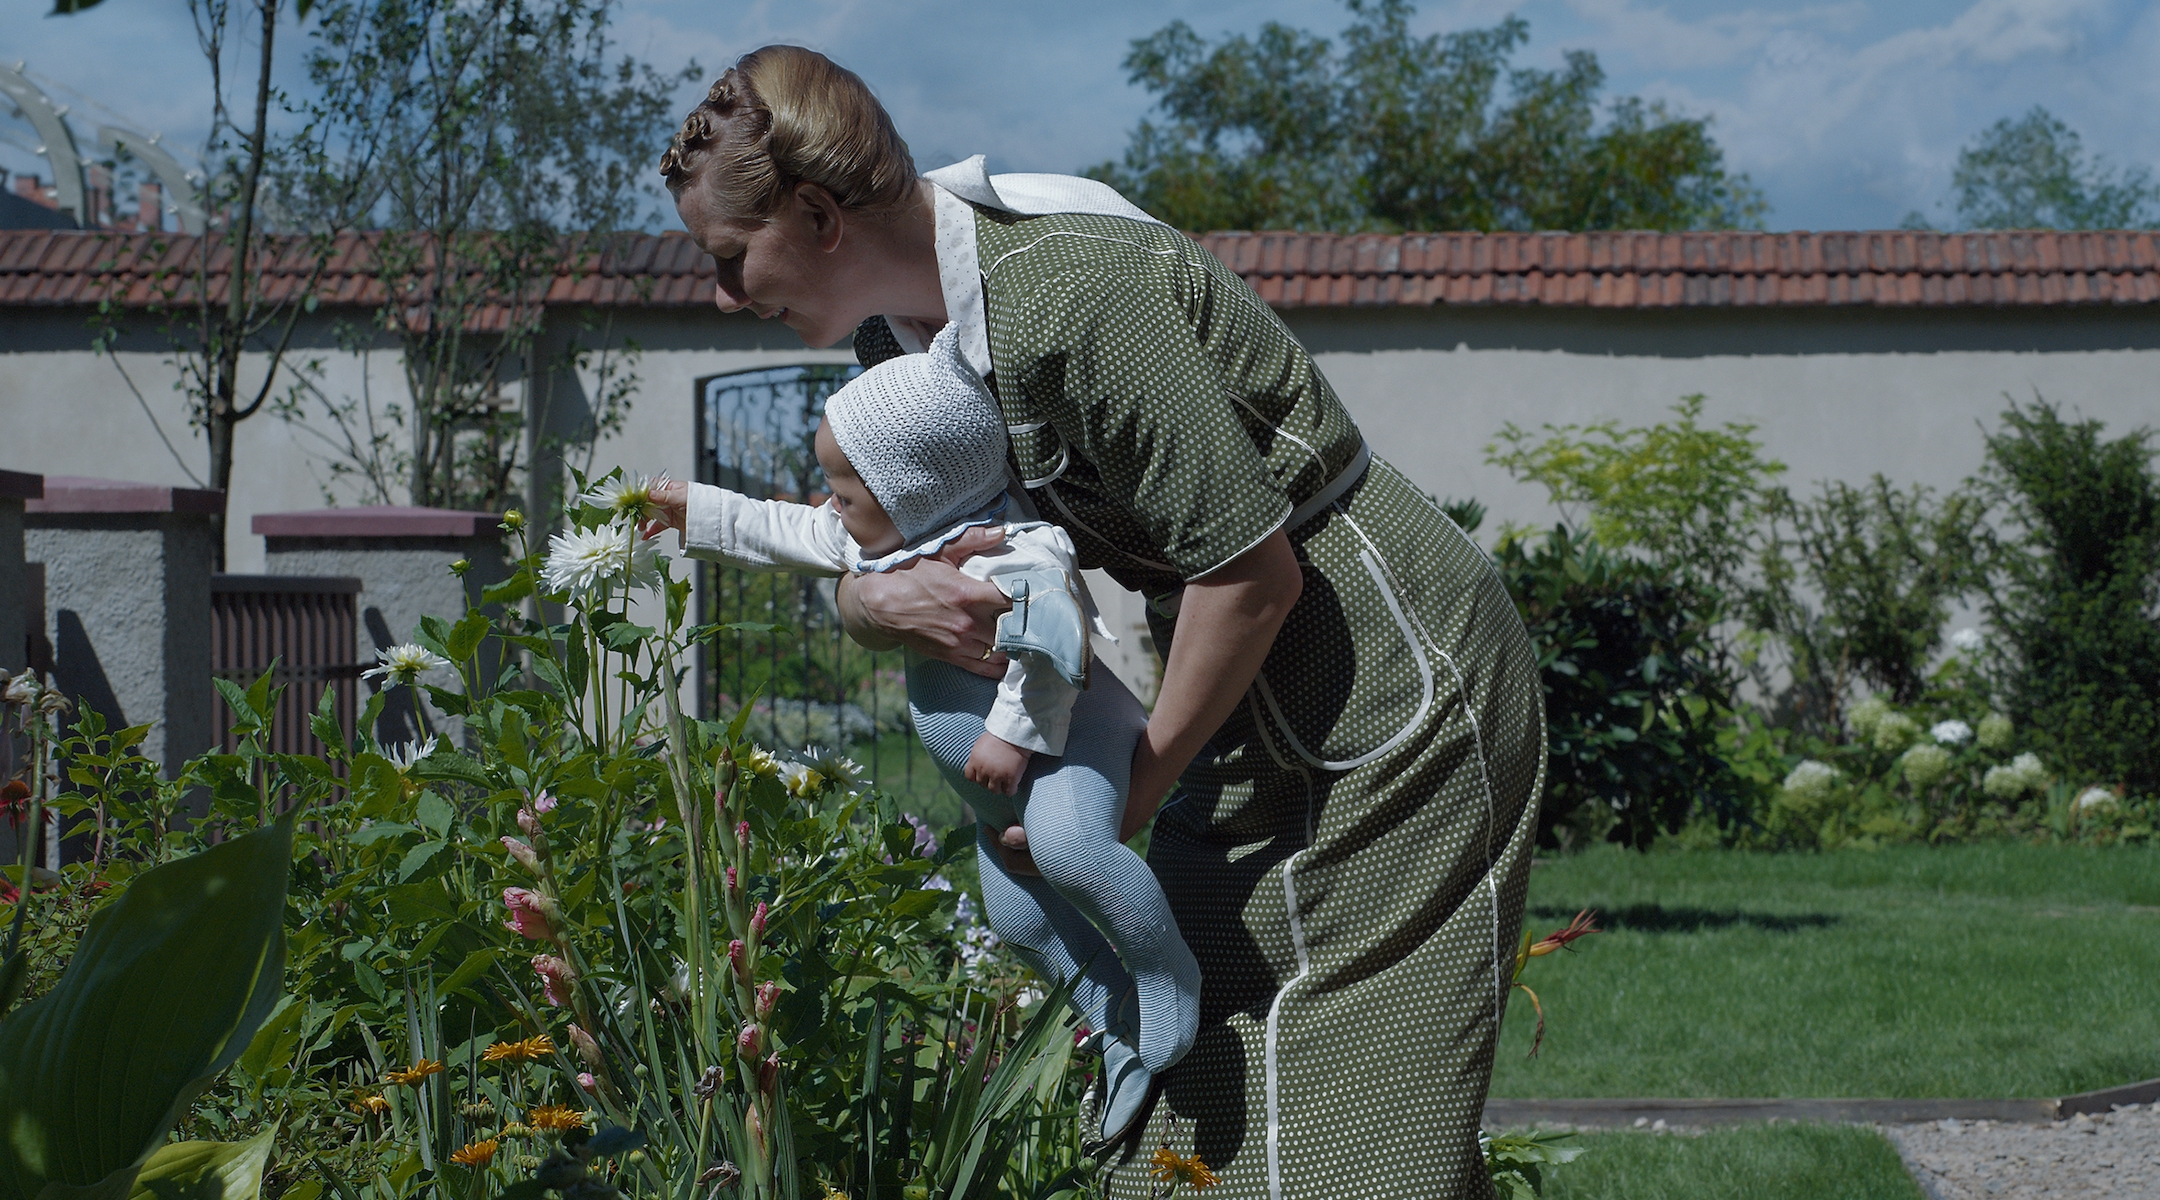 A Nazi mother shows her infant daughter their garden in the shadow of Auschwitz in a still from the movie "The Zone of Interest"